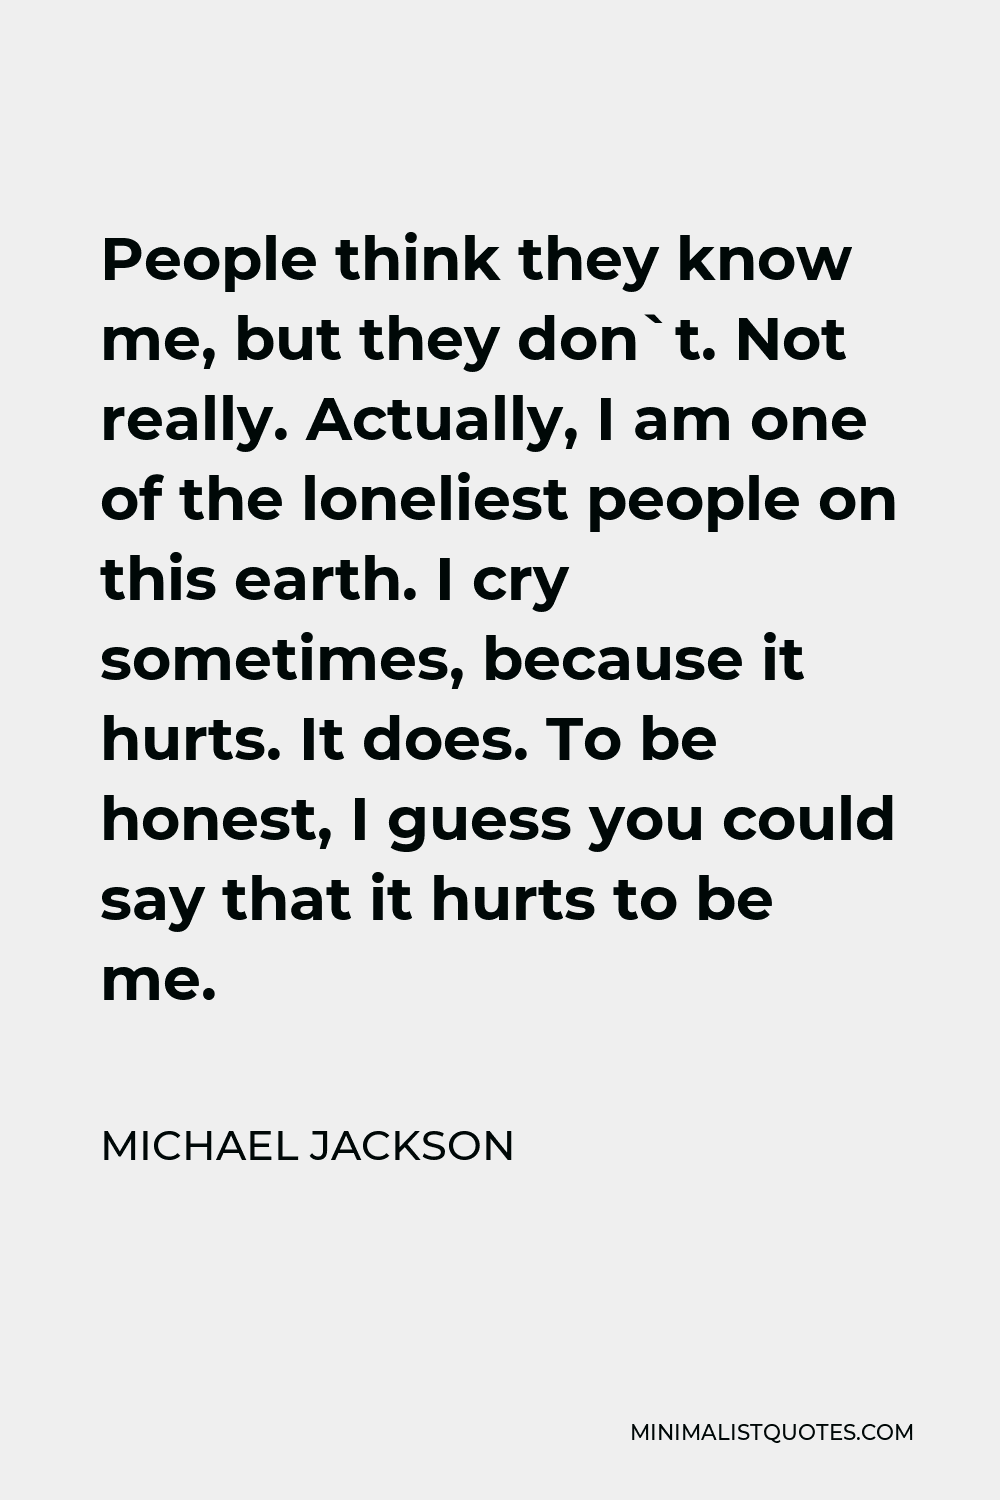 Michael Jackson Quote - People think they know me, but they don`t. Not really. Actually, I am one of the loneliest people on this earth. I cry sometimes, because it hurts. It does. To be honest, I guess you could say that it hurts to be me.